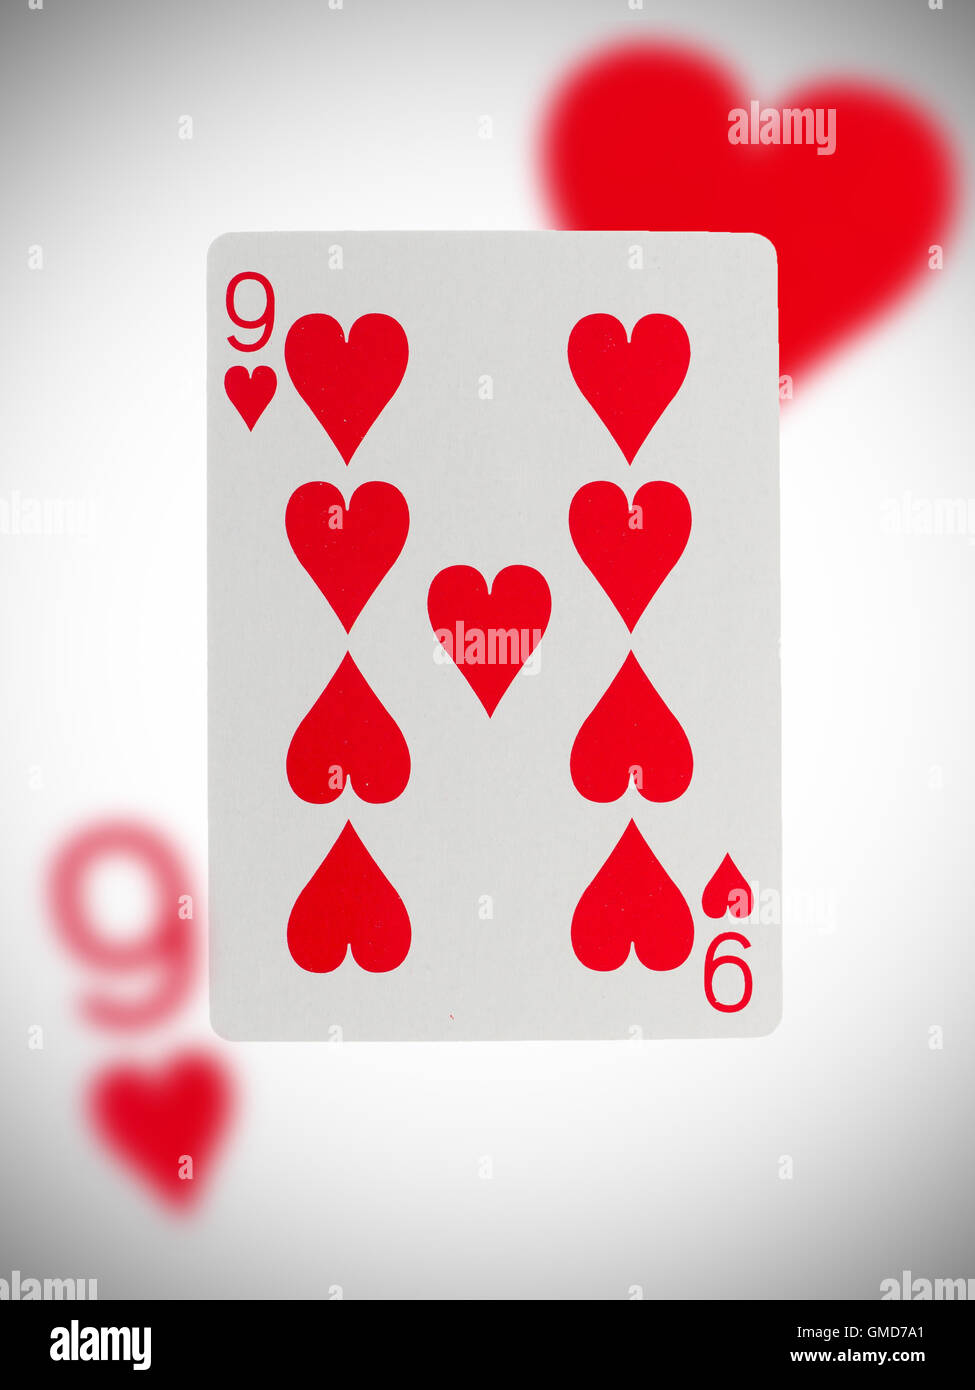 Poker playing card 9 heart Royalty Free Vector Image